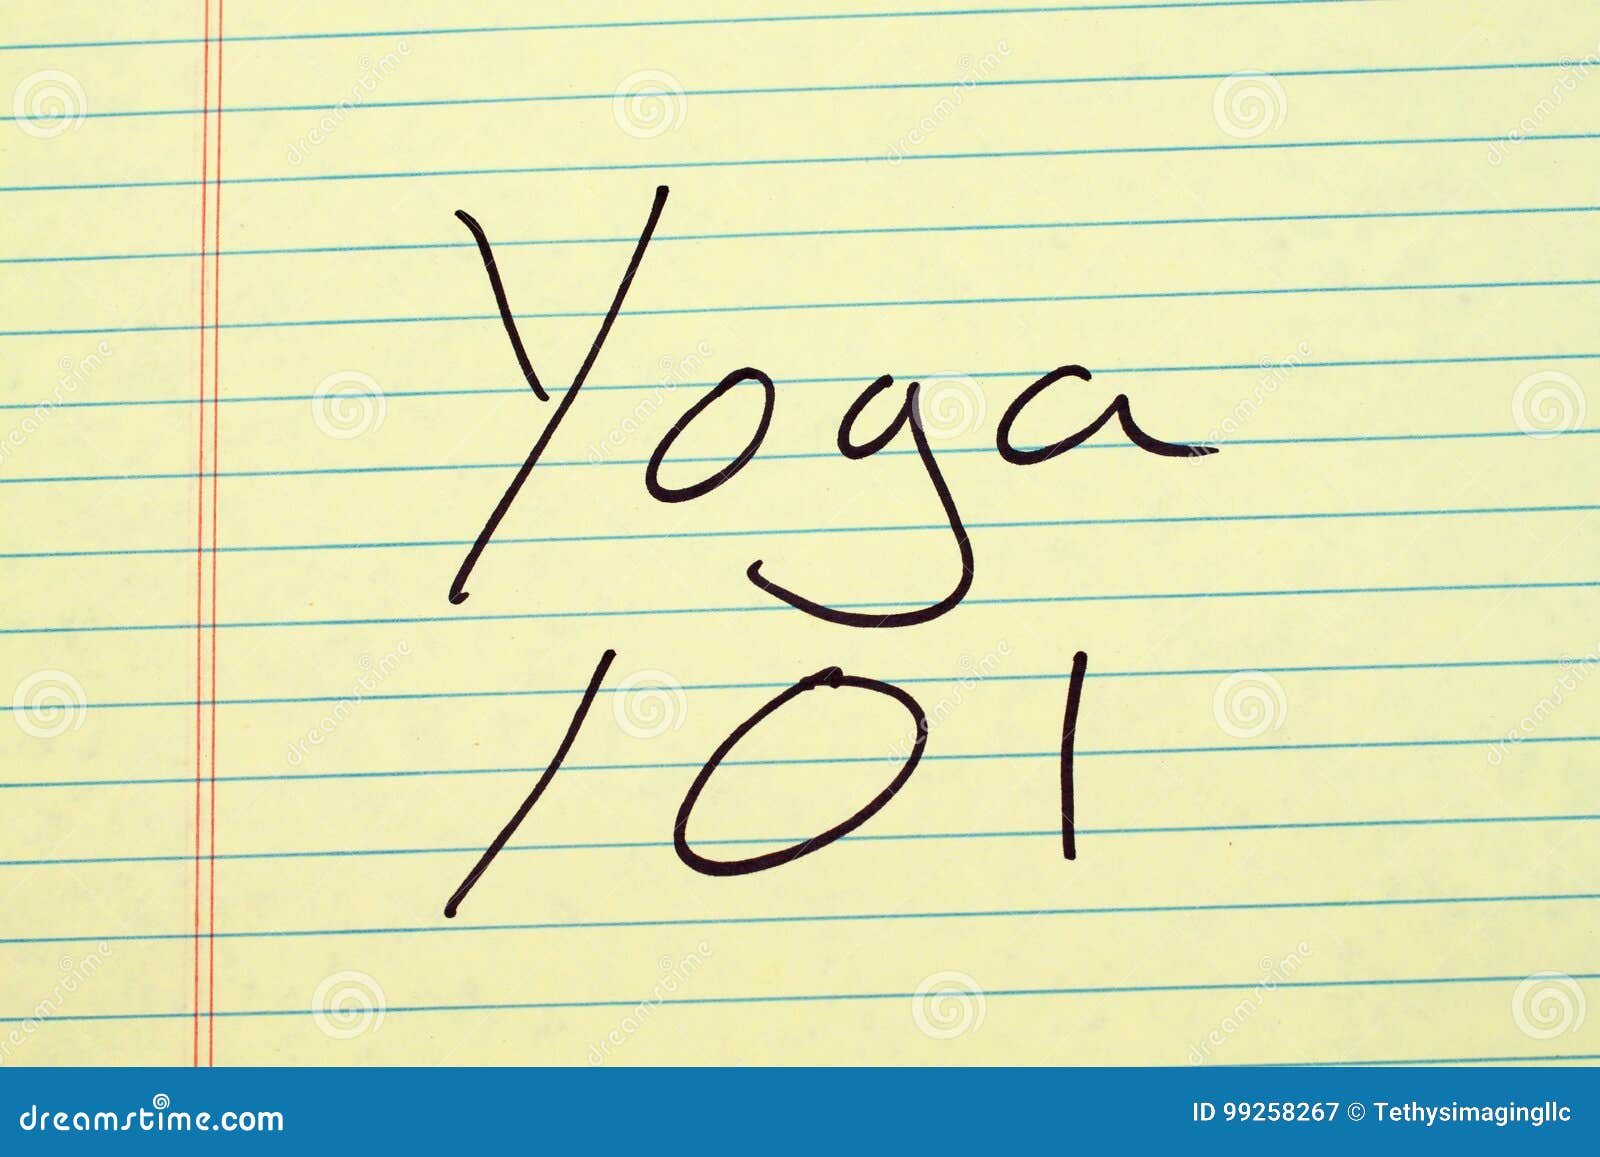 yoga 101 on a yellow legal pad